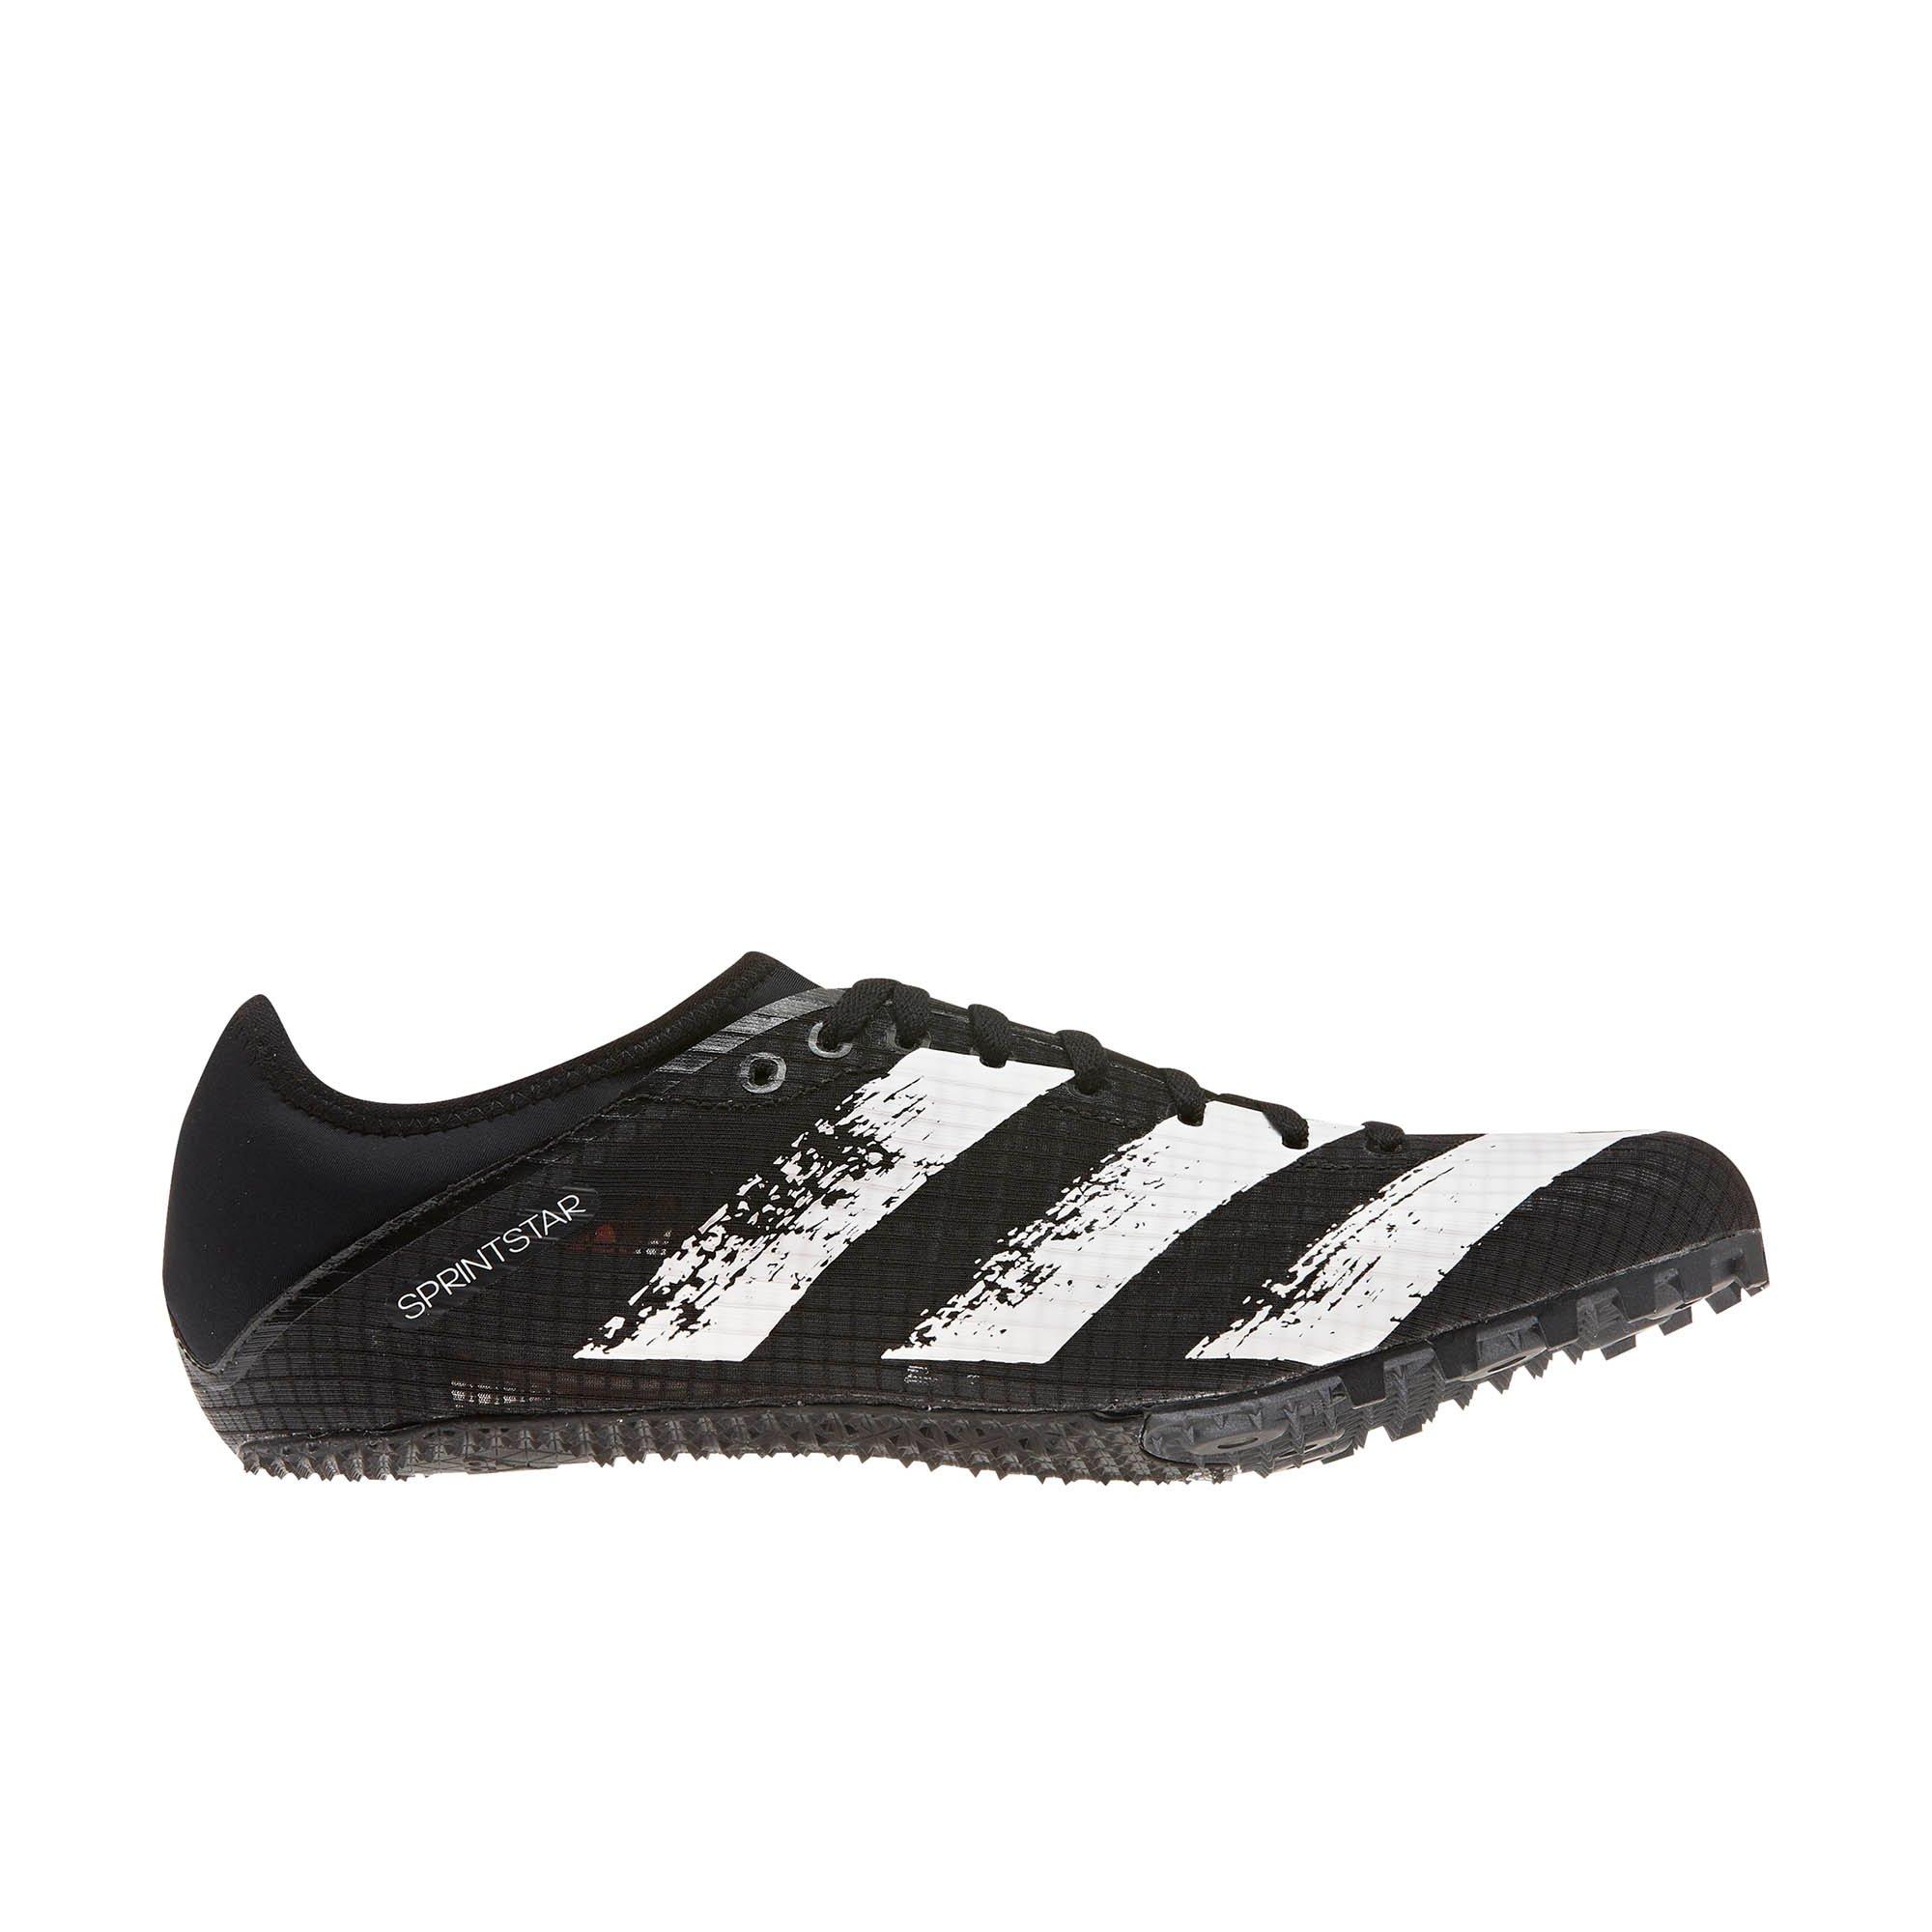 adidas track and field spikes